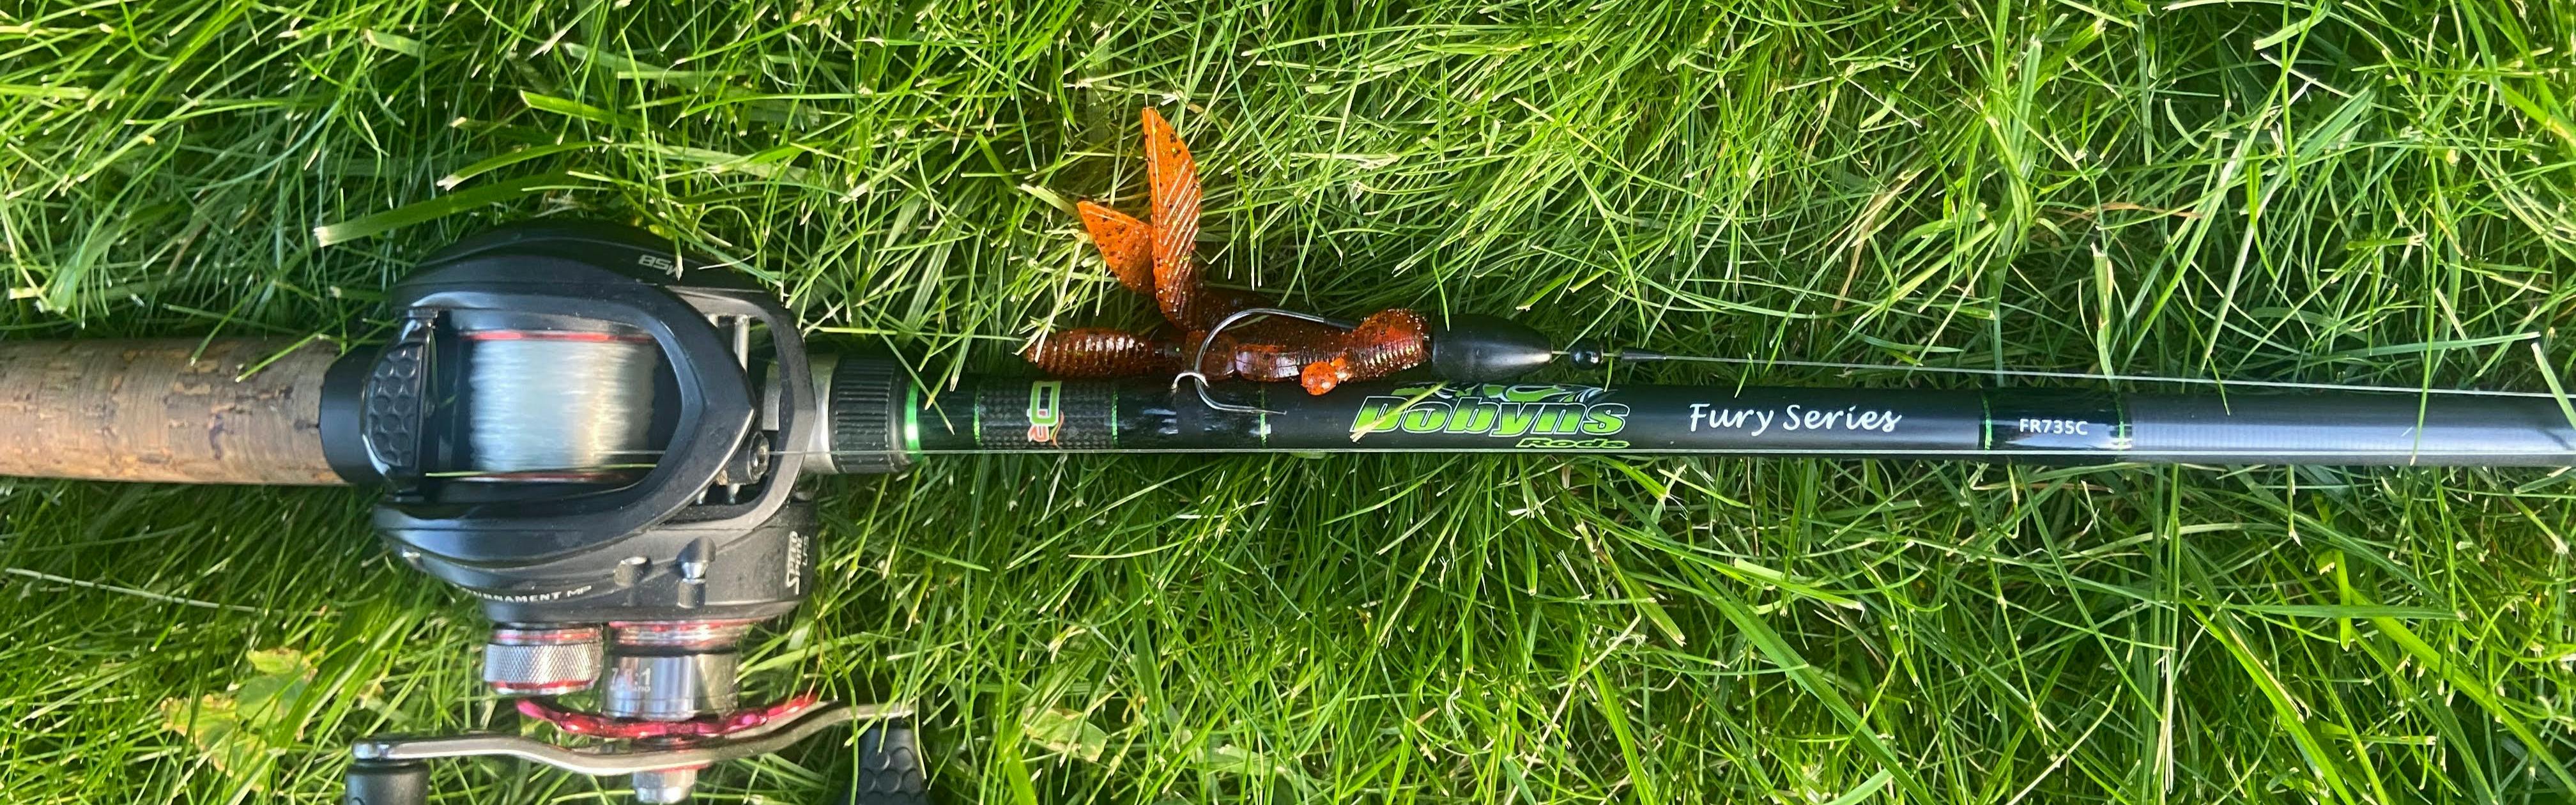 Dobyn's Fury fishing rod 735c paired with a Lew's Tournament MP. 